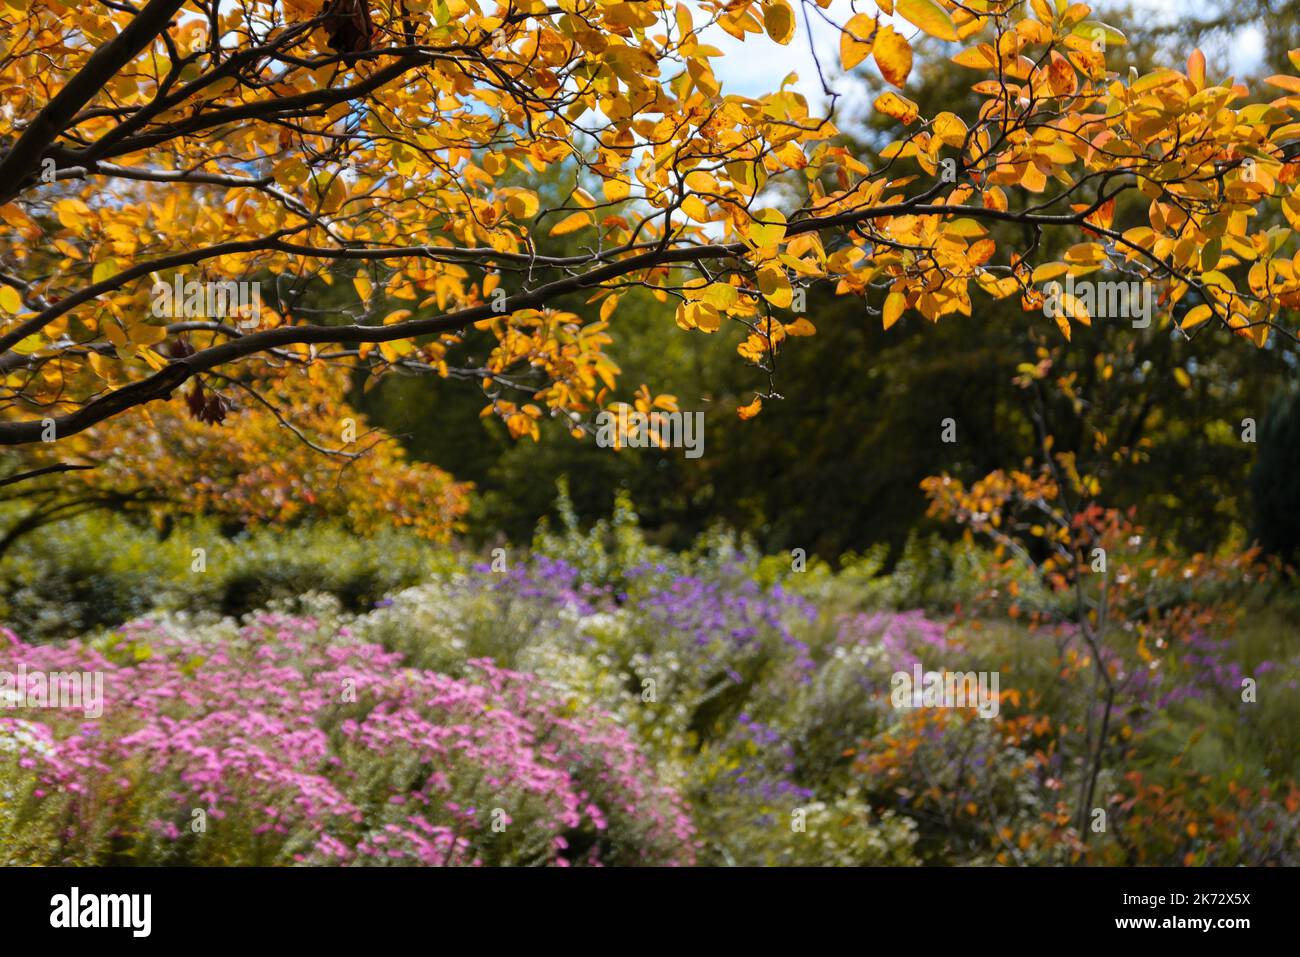 Autumn garden with yellow leaves and colorful flowers Stock Photo